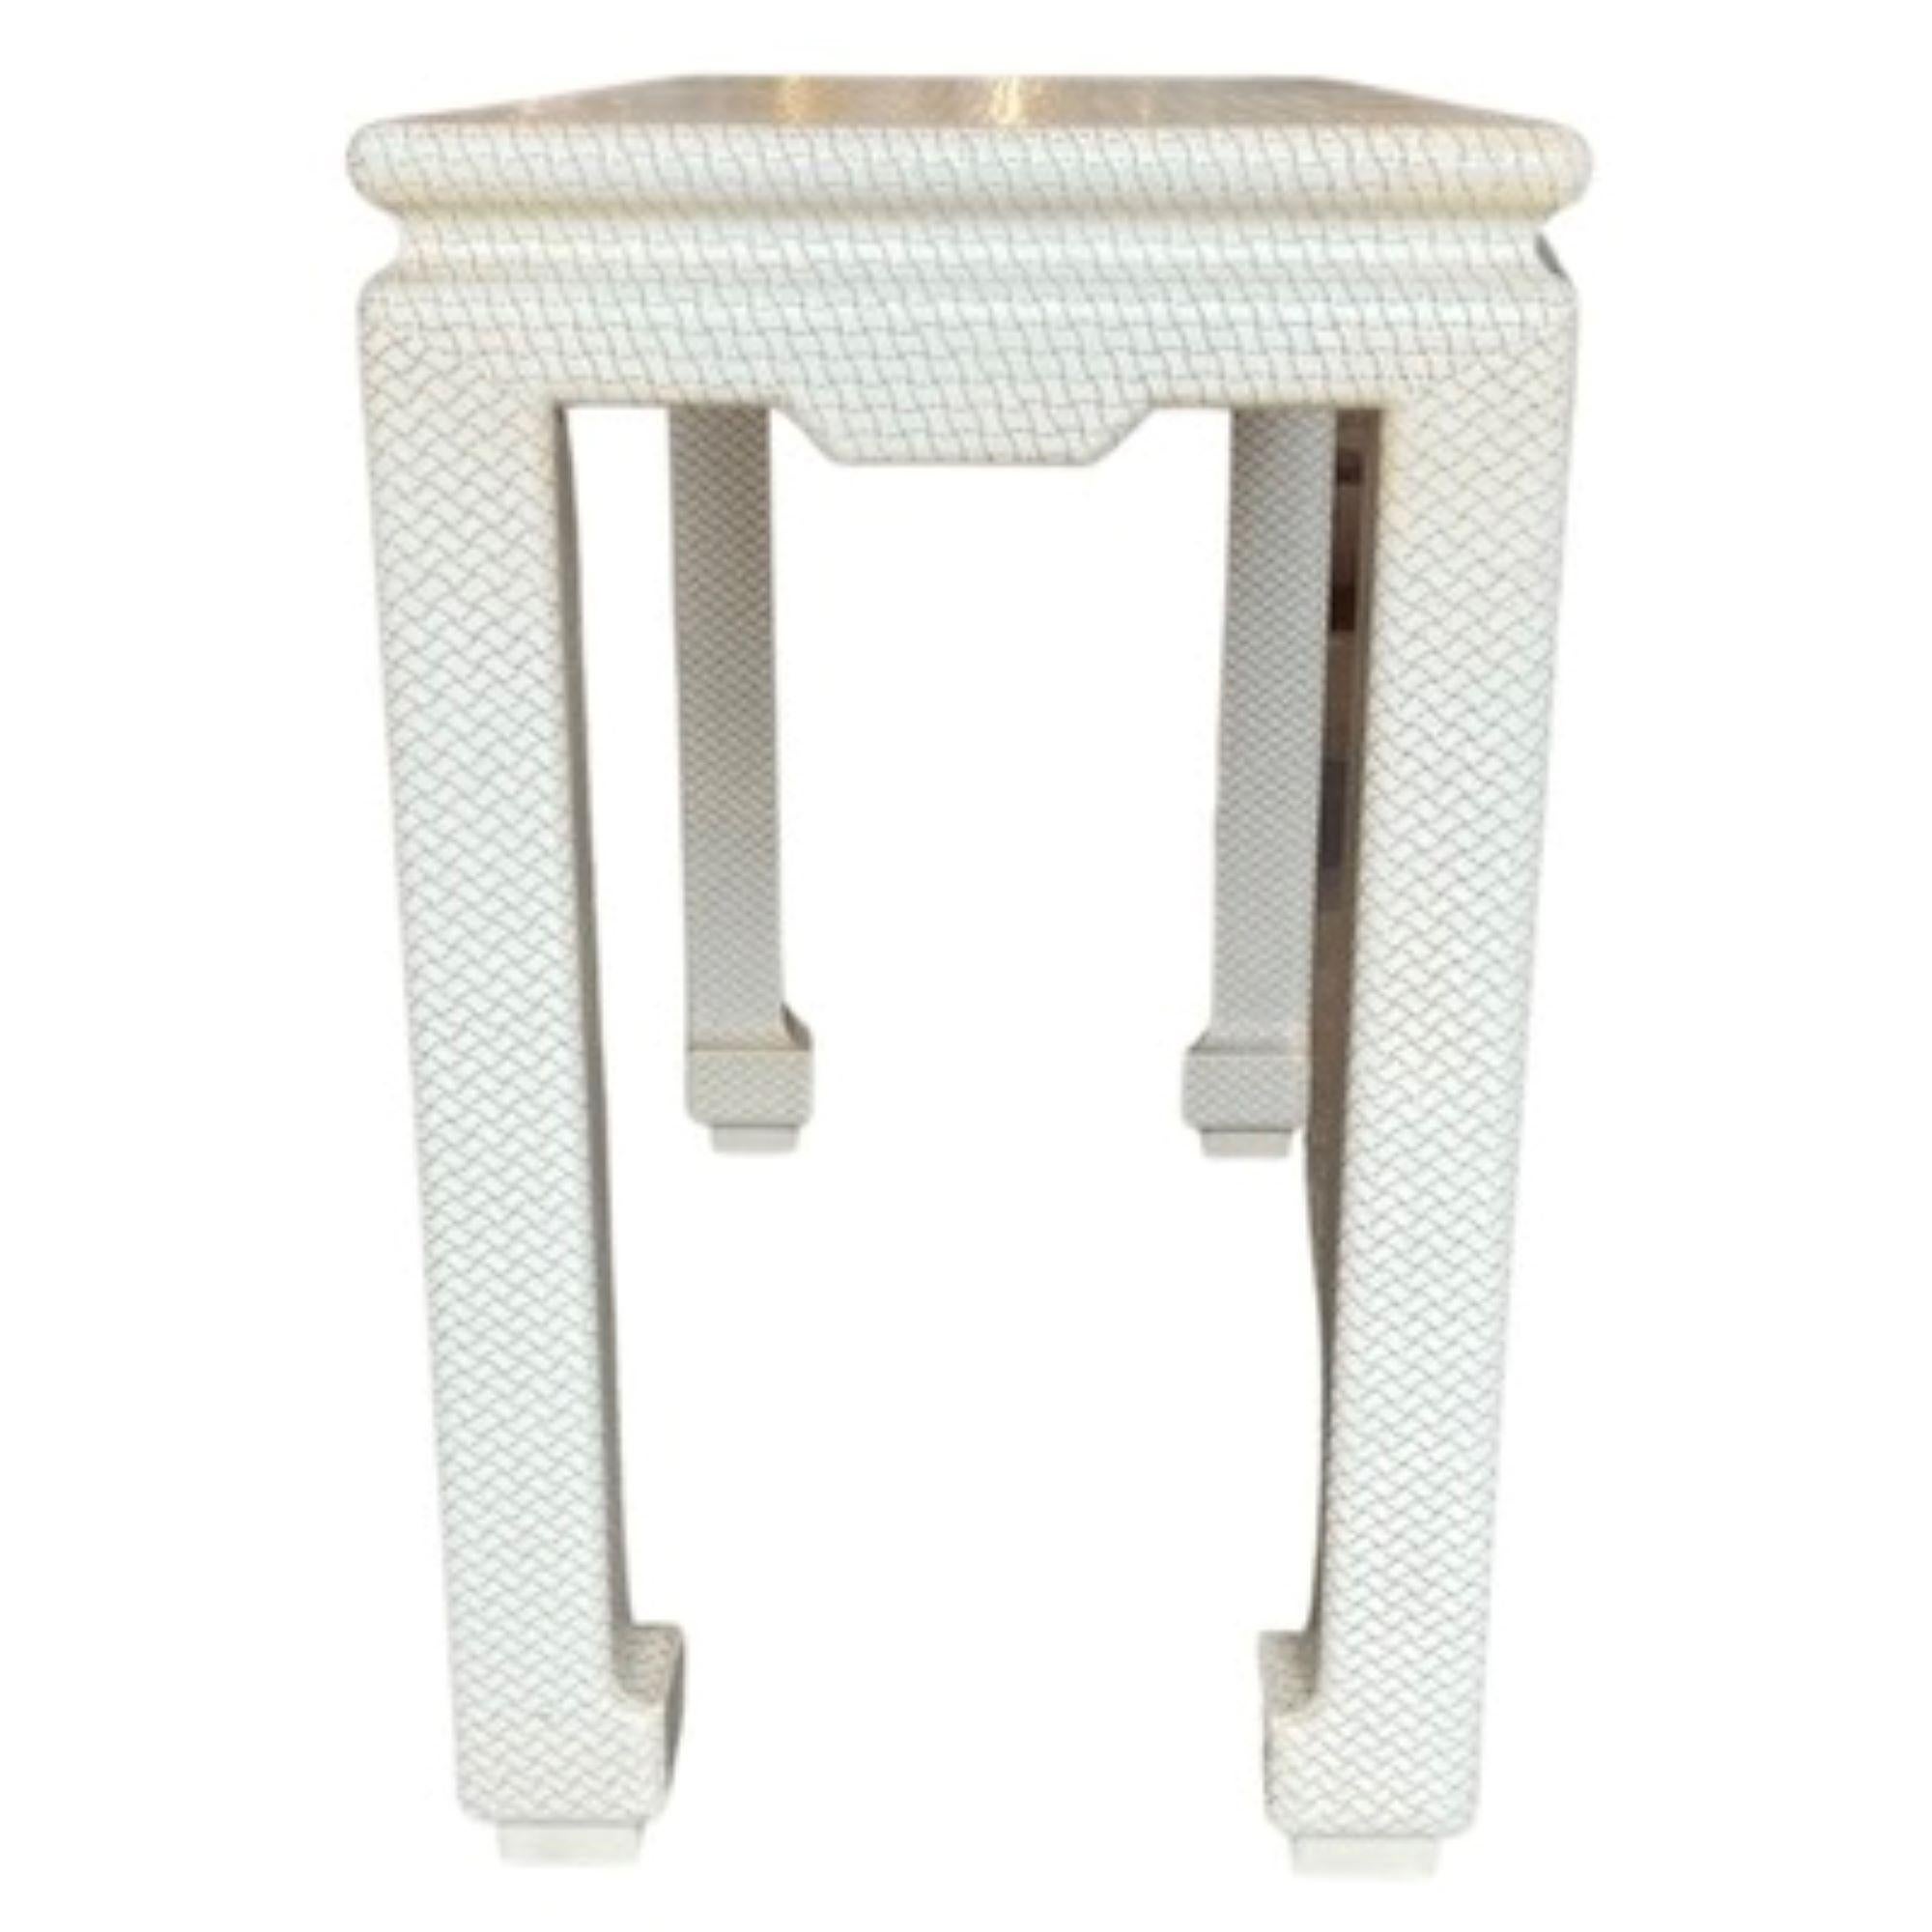 Beautiful ivory tone console table.
Wood base with woven overlay textured finish
Very unique creation by Karl Springer
Made in the USA
1970's
Rectangular legs featuring extended feet
Vintage
Mid-Century Modern
This petit console table is a